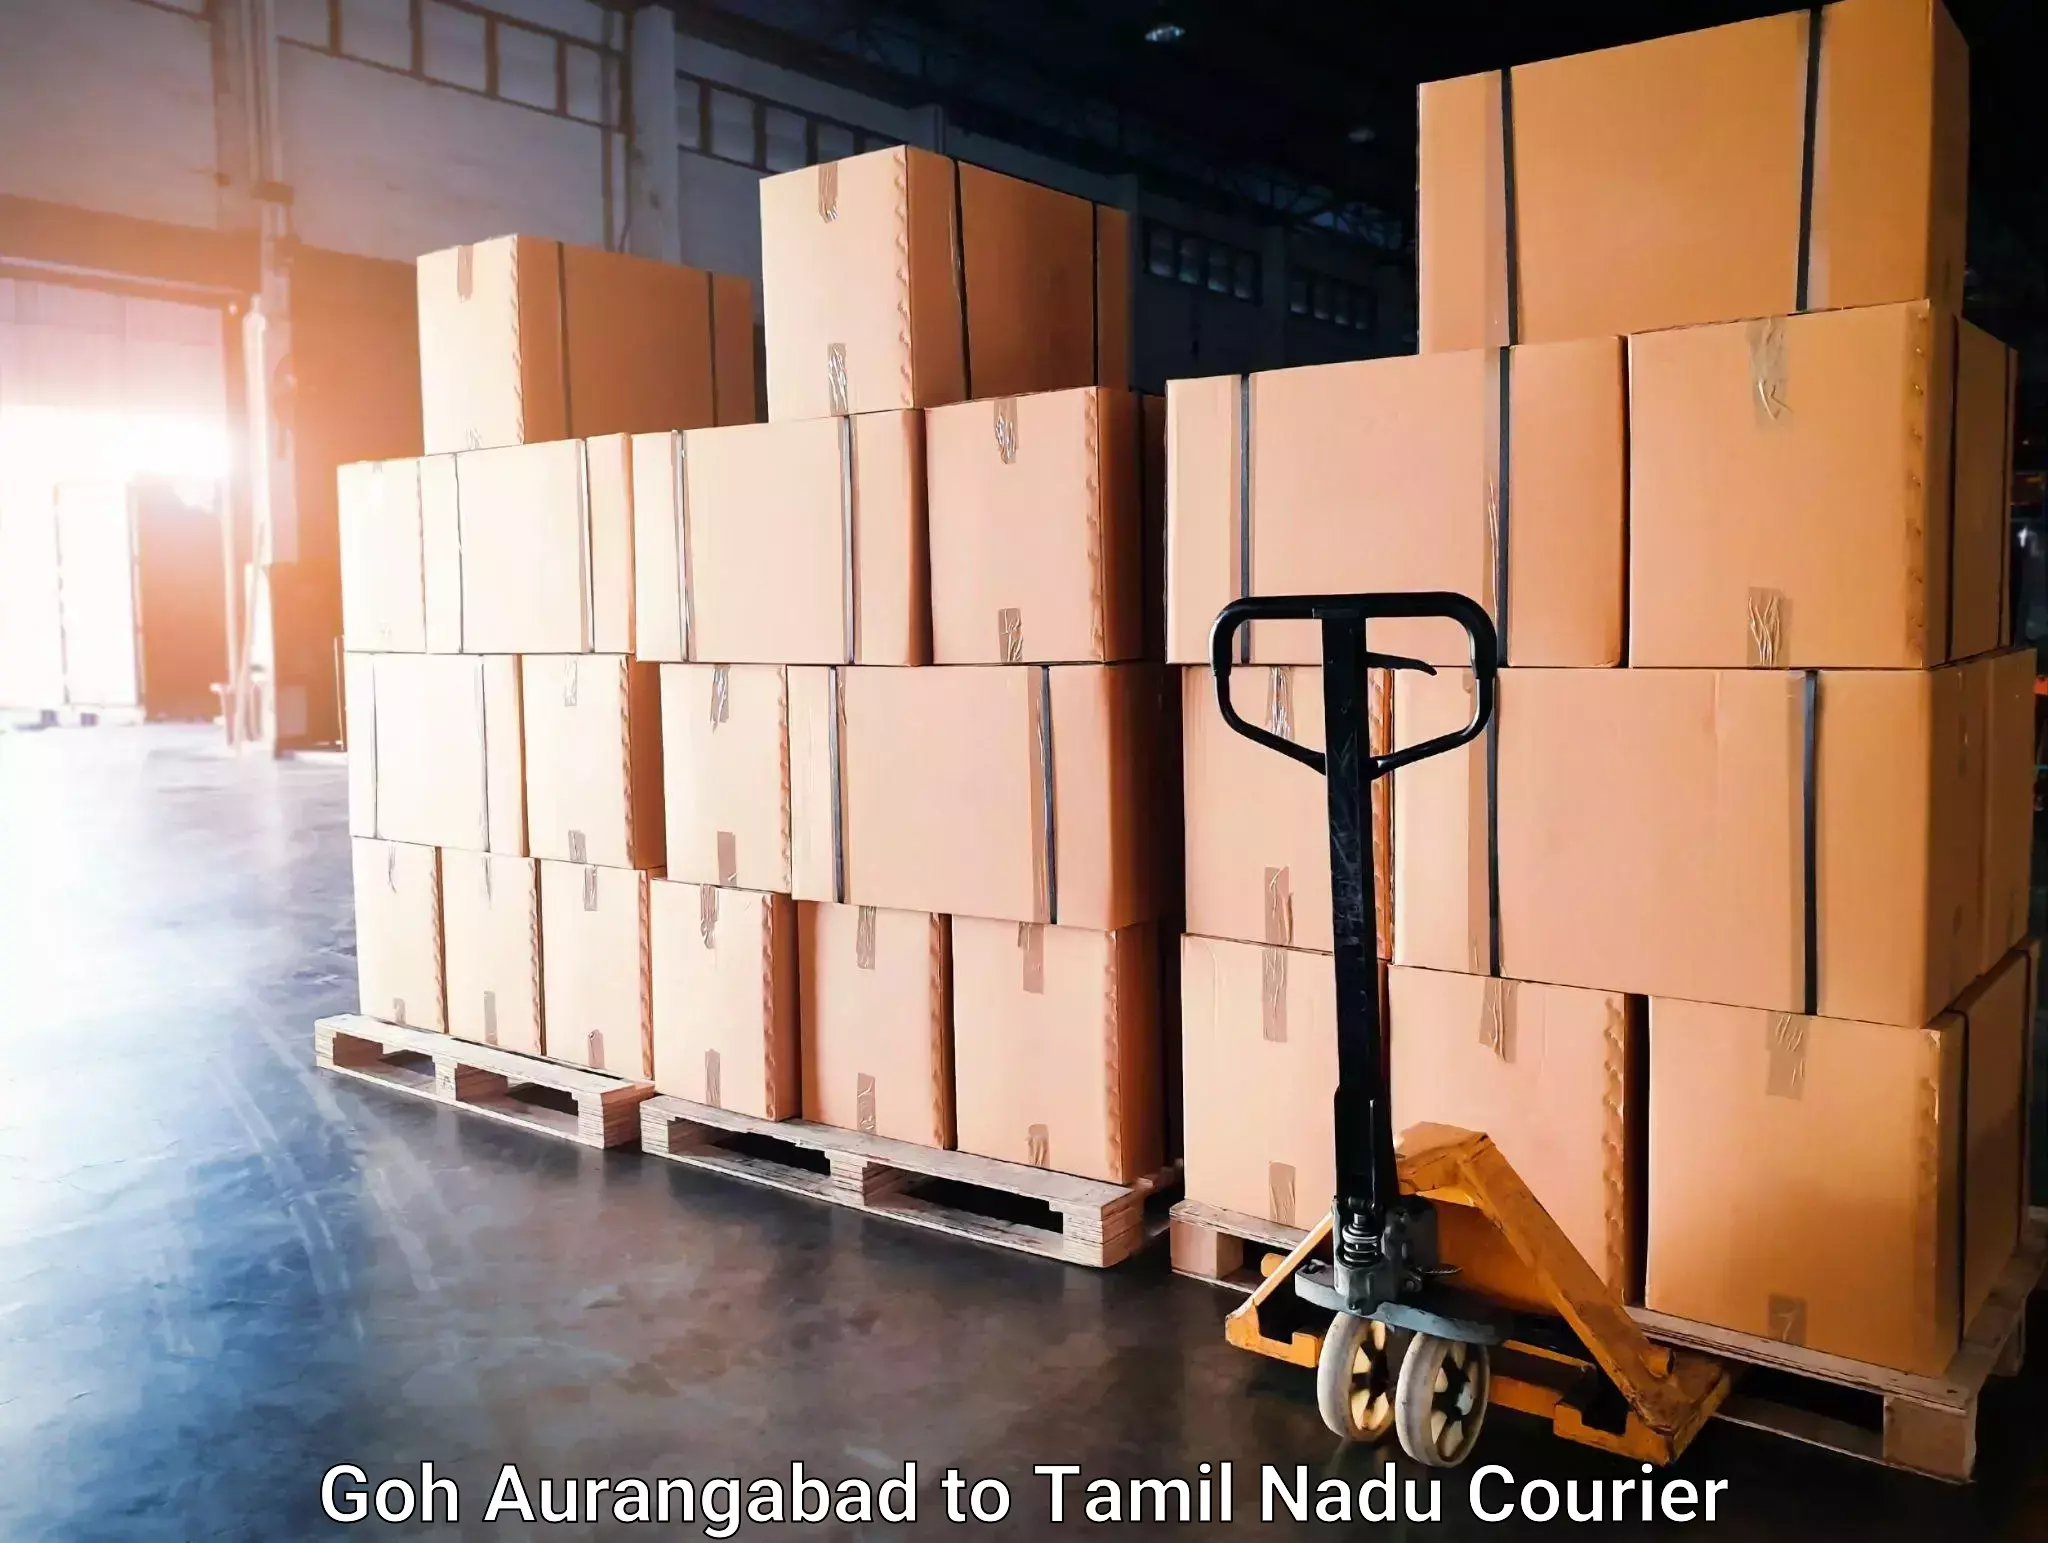 Moving and storage services Goh Aurangabad to Saveetha Institute of Medical and Technical Sciences Chennai